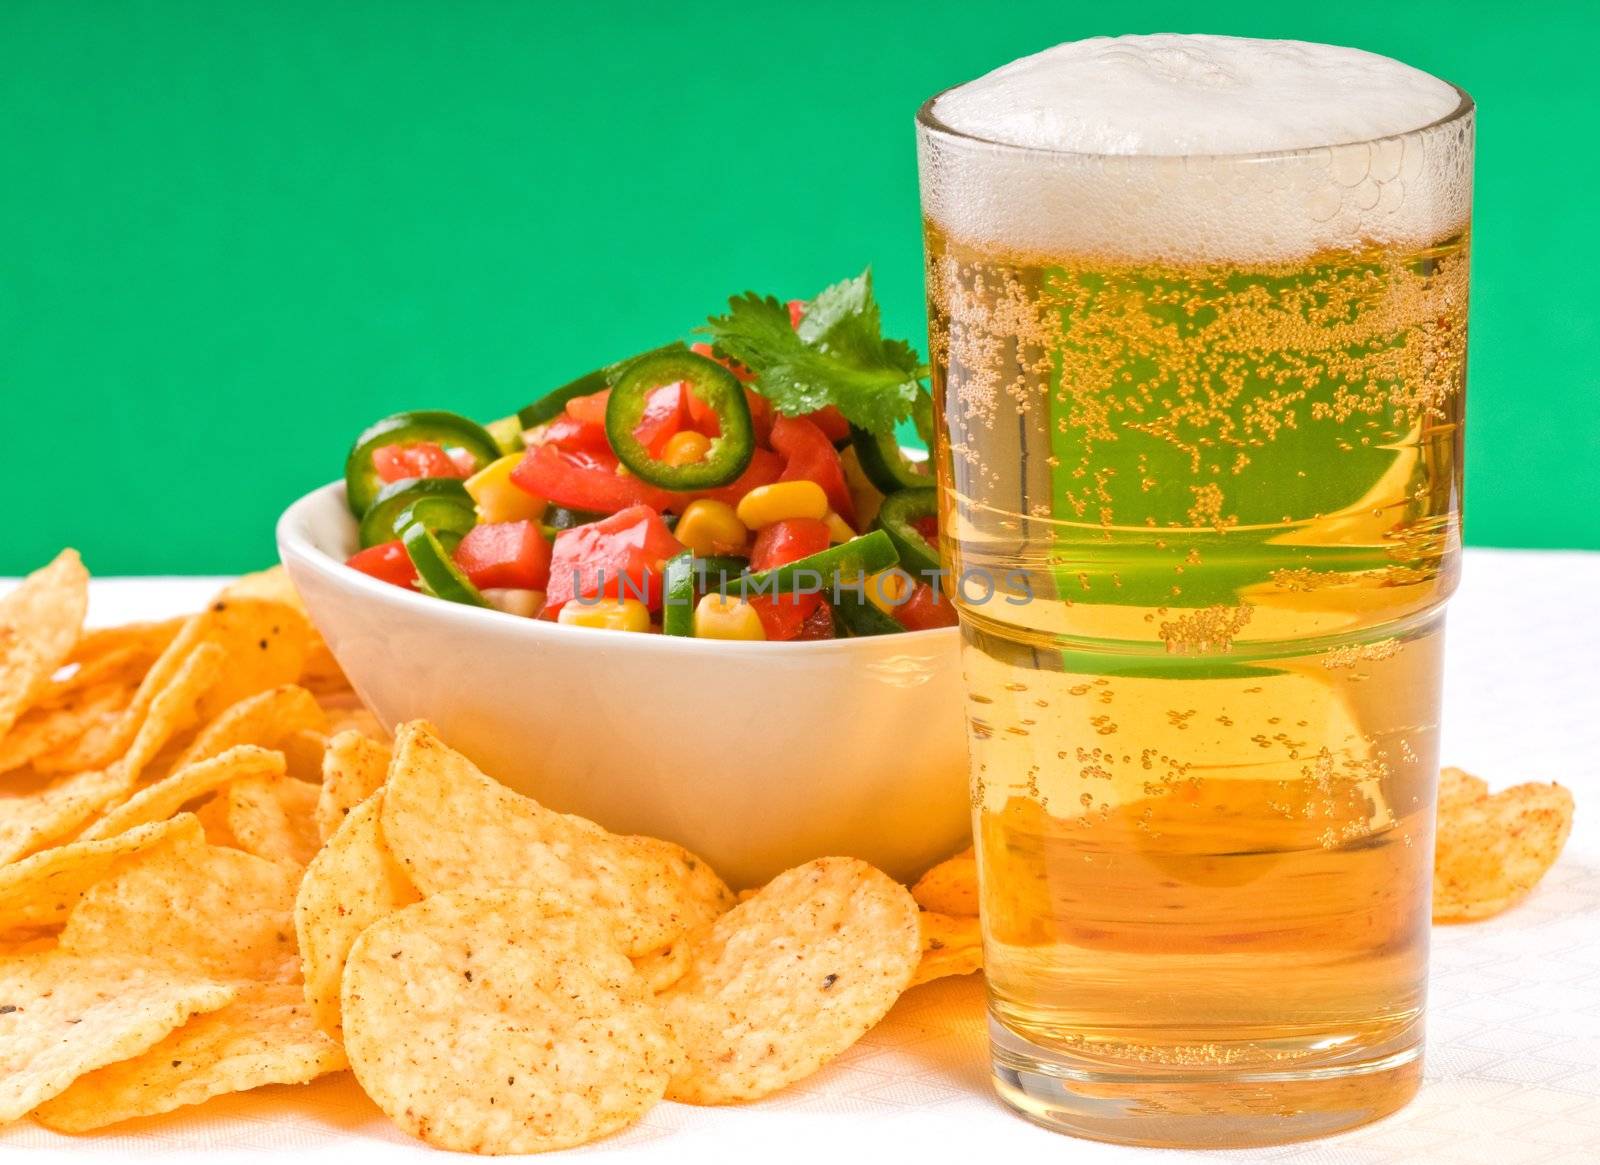 Cold beer and spicy salsa with corn chips.